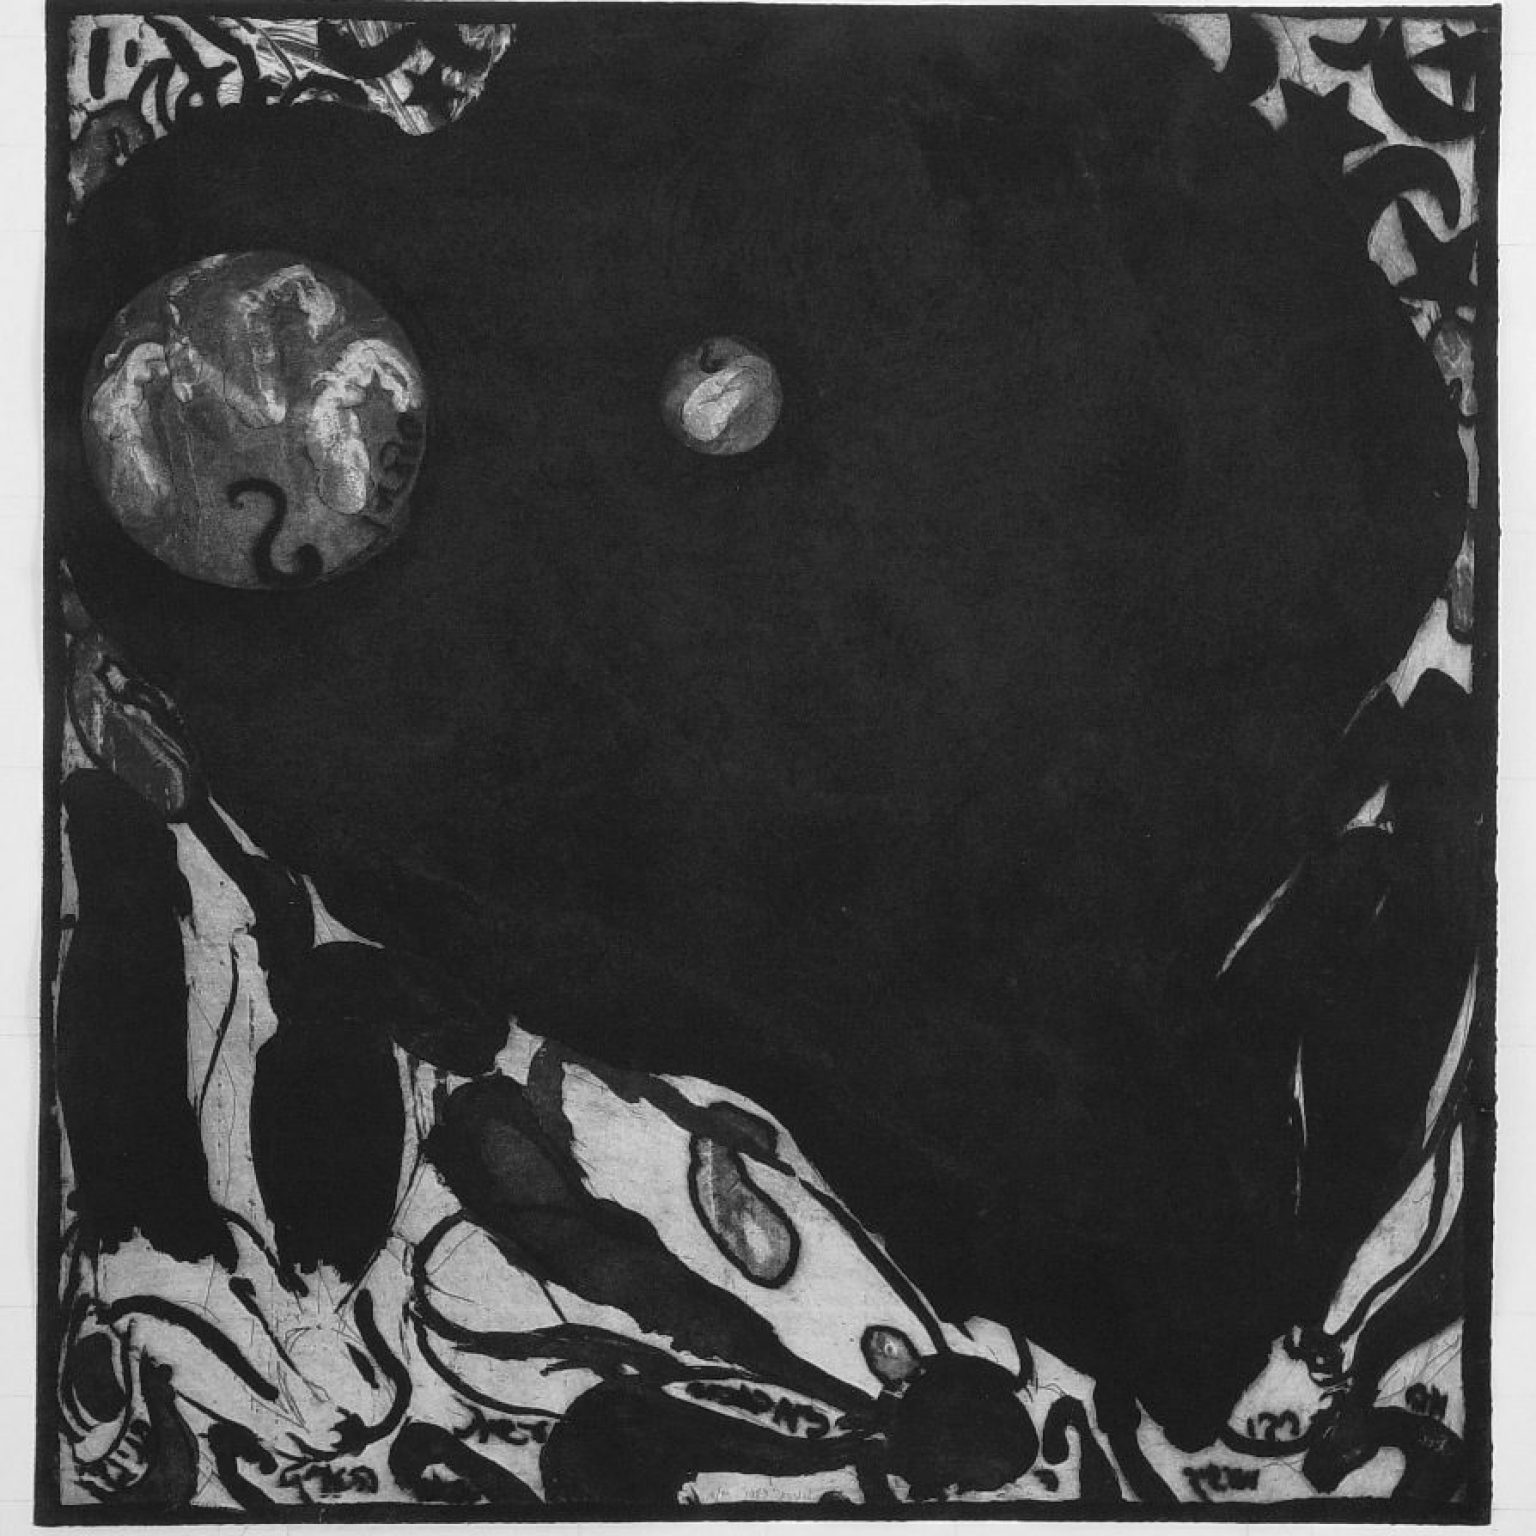 Veyitʻalleh (From The Kaddish Series), 1984, Etching, aquatint, soft ground and electric pencil, 81 x 77 cm
Edition: 25